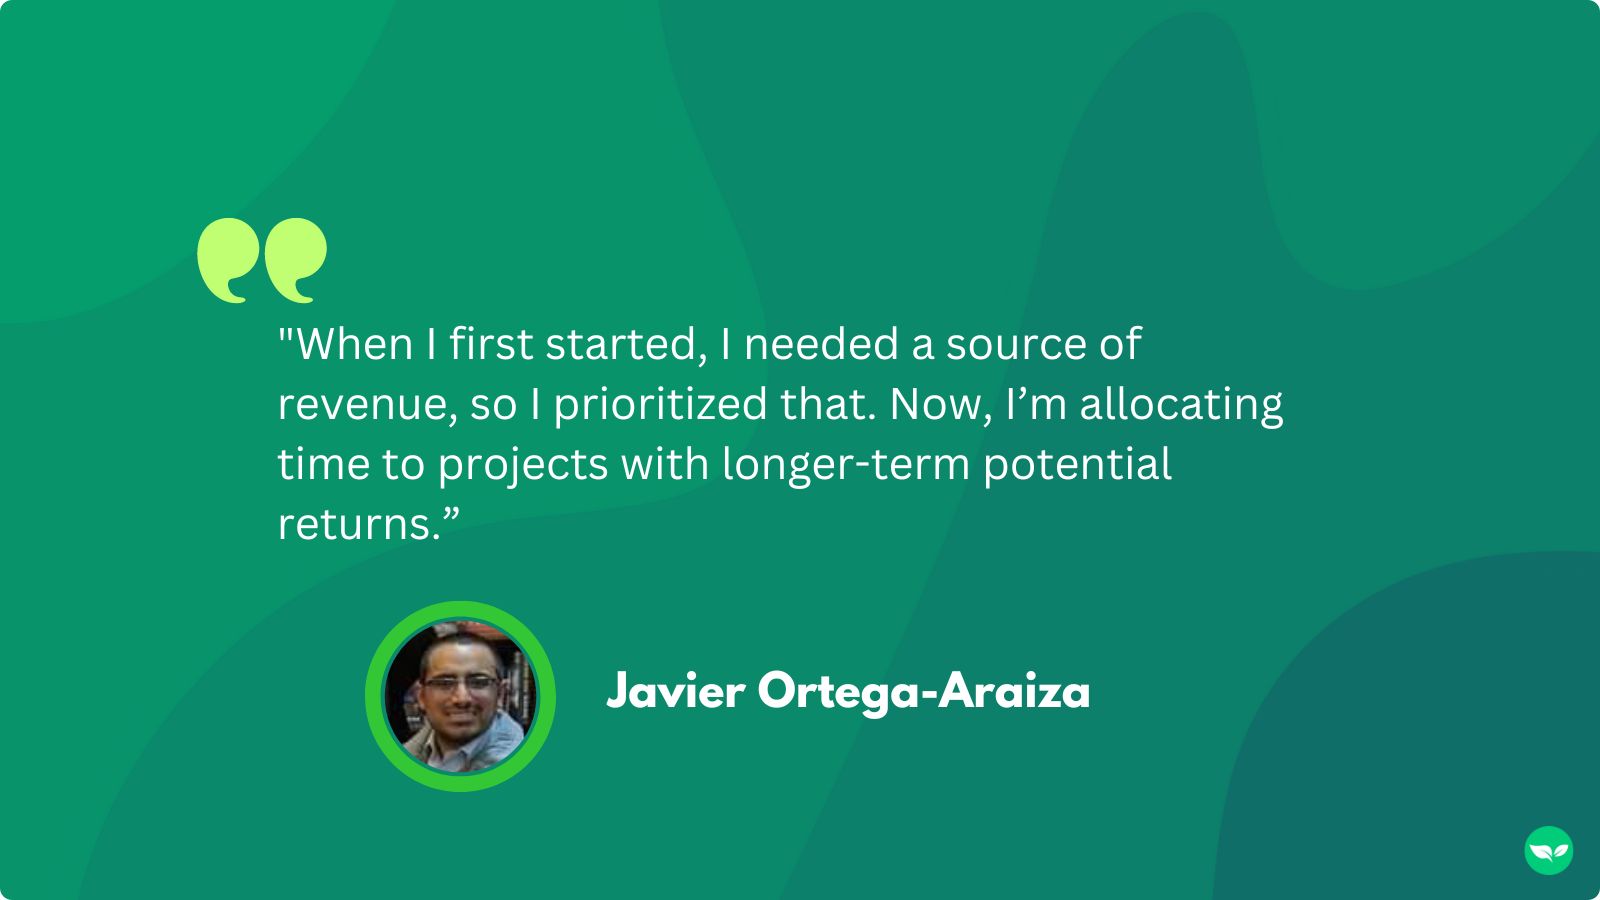 A quote from Javier, "When I first started, I needed a source of revenue, so I prioritized that. Now, I’m allocating time to projects with longer-term potential returns"